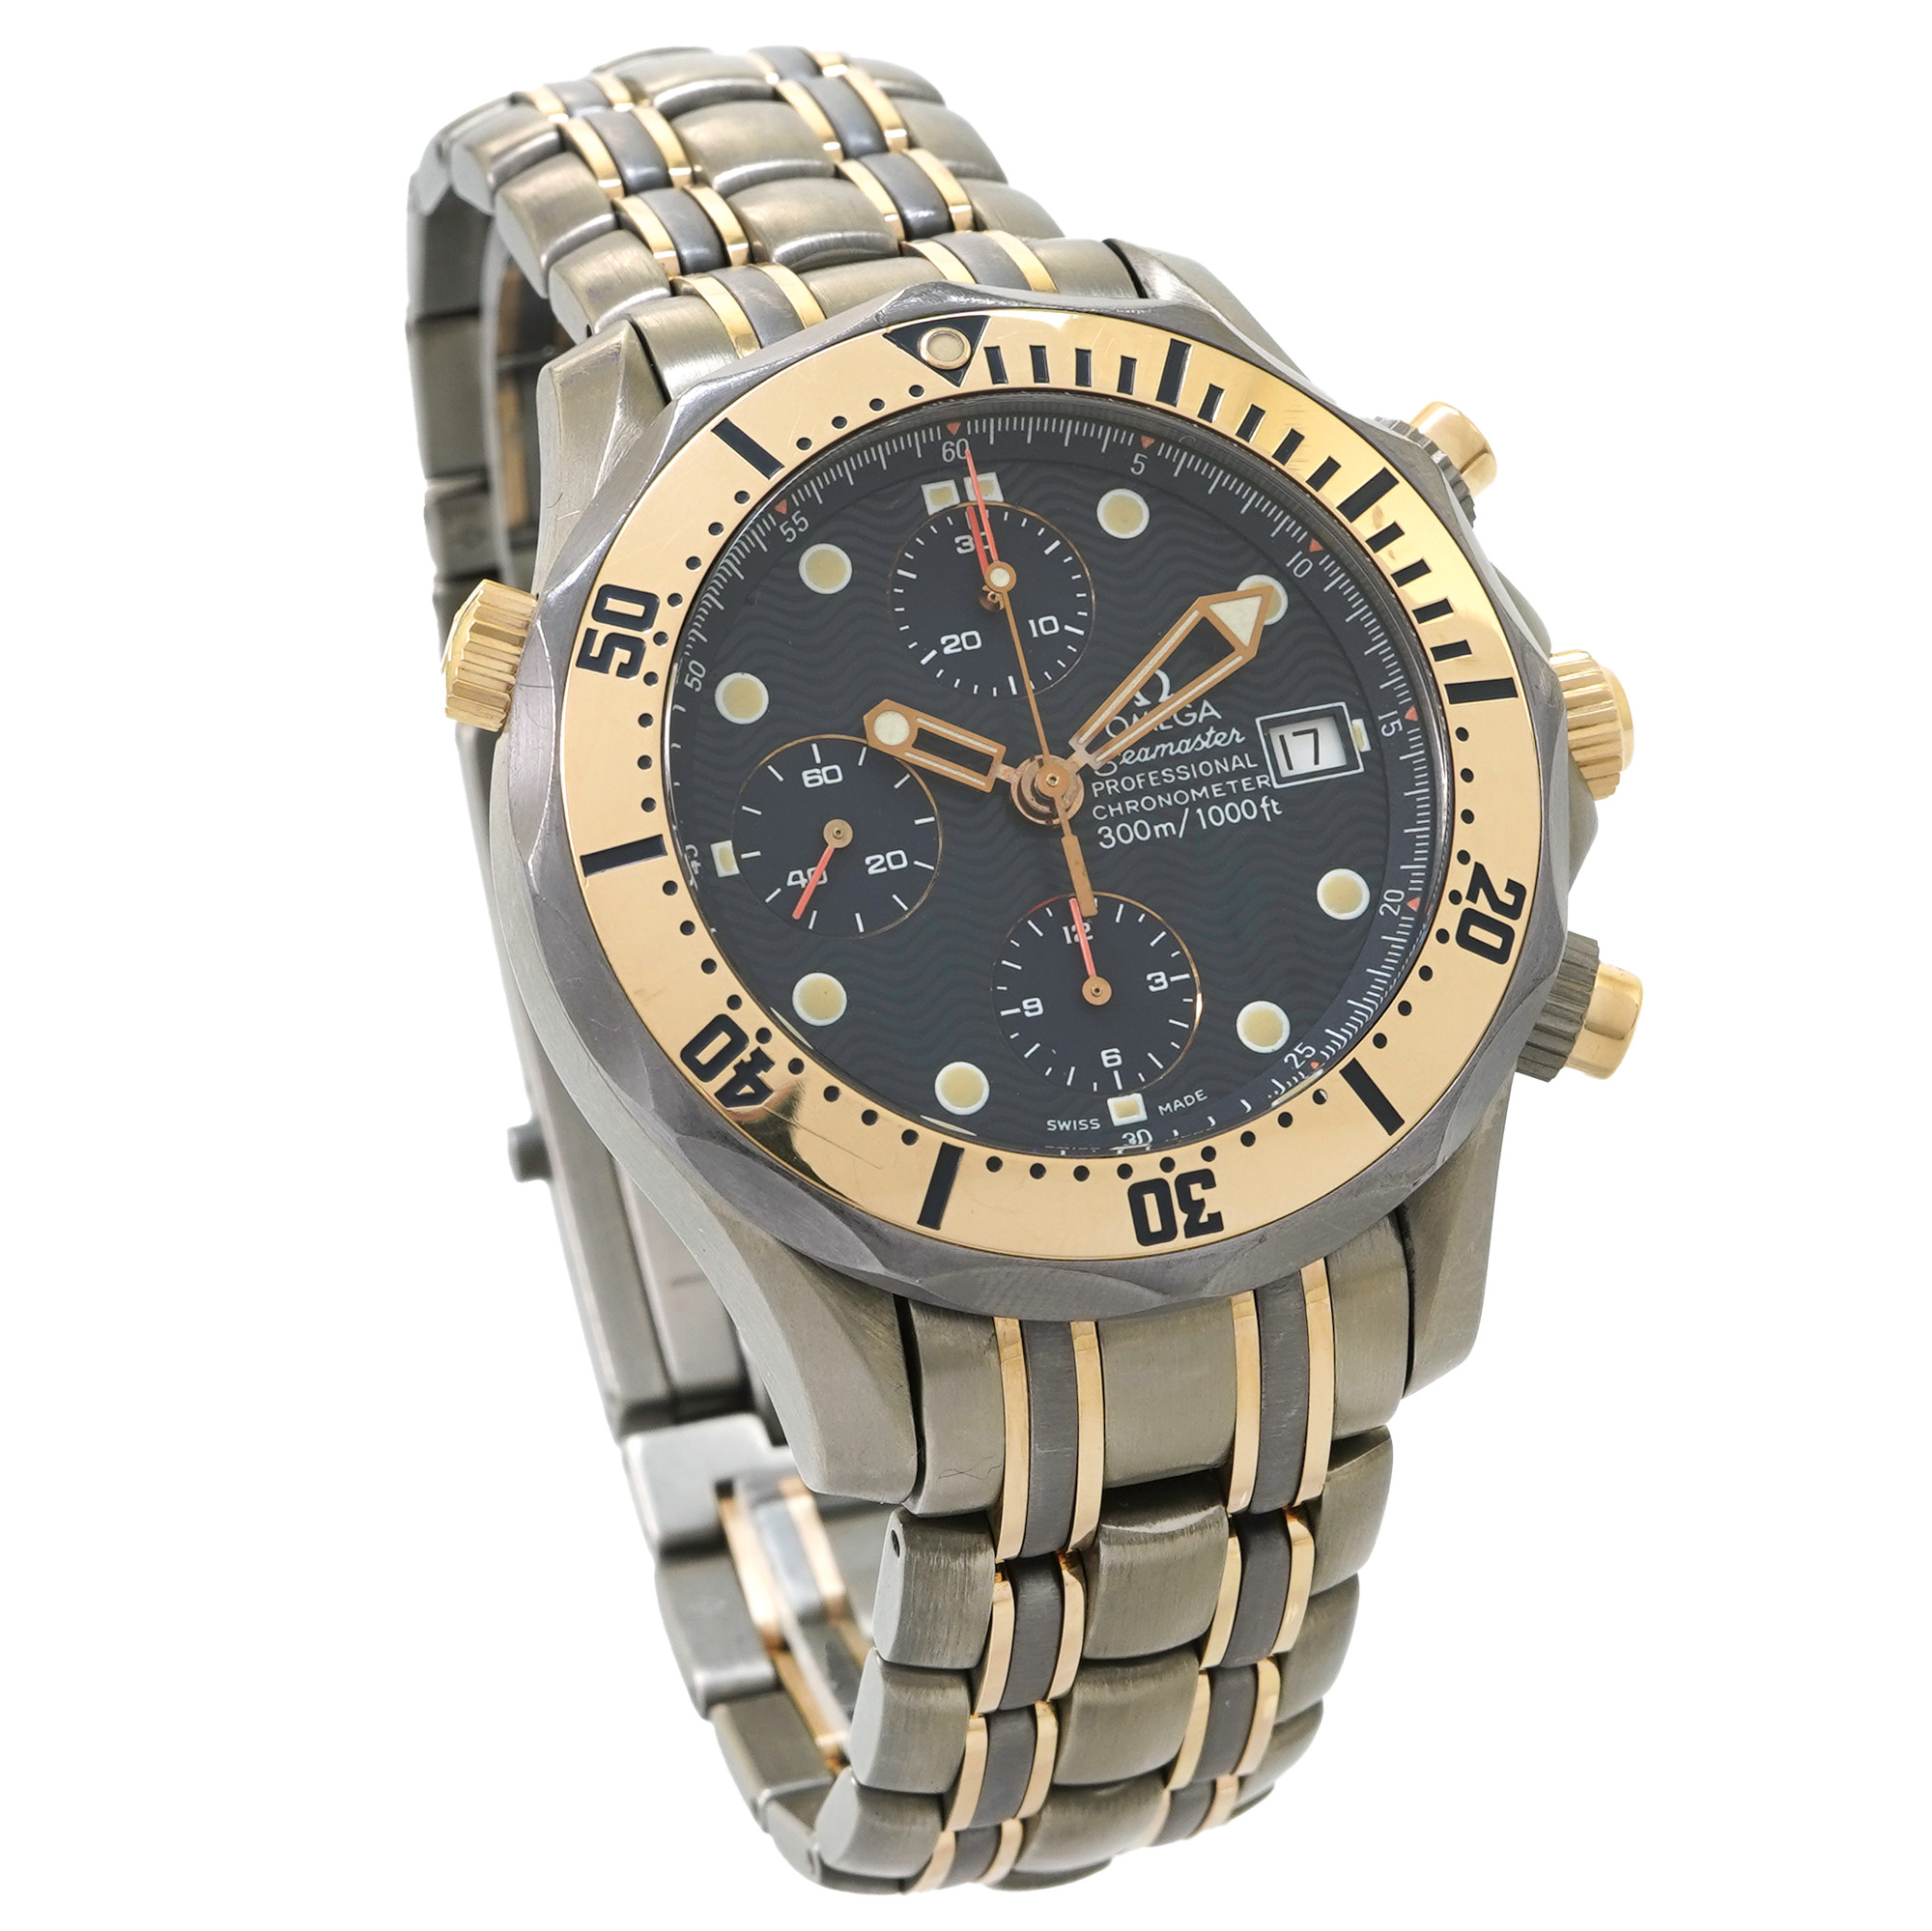 Omega Seamaster Chronograph 41.5mm Titanium and Rose Gold 2296.80 - Inventory 5277